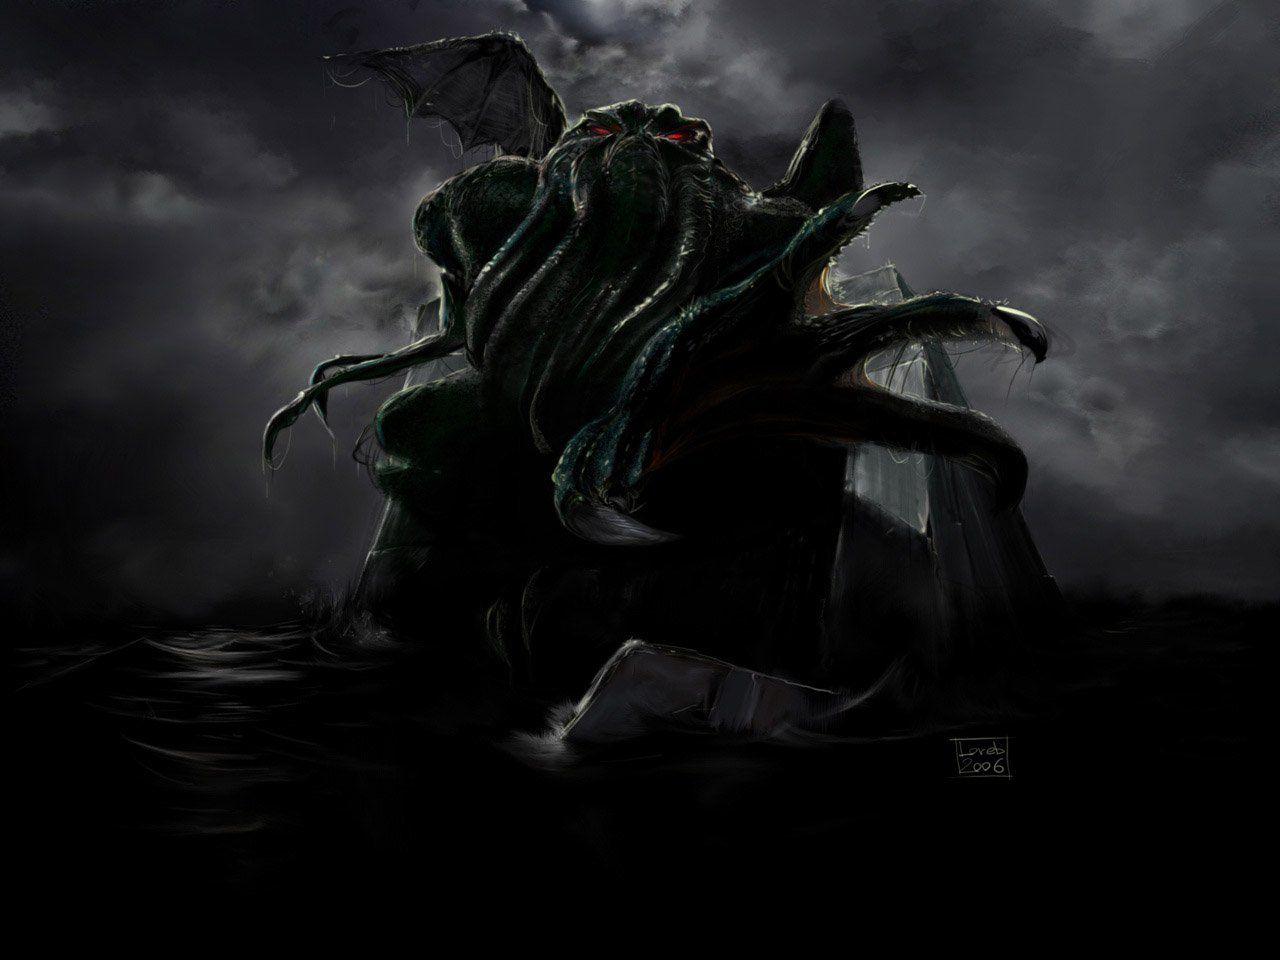 Scary Monster Wallpaper. Cthulhu, Scary wallpaper, Lovecraft